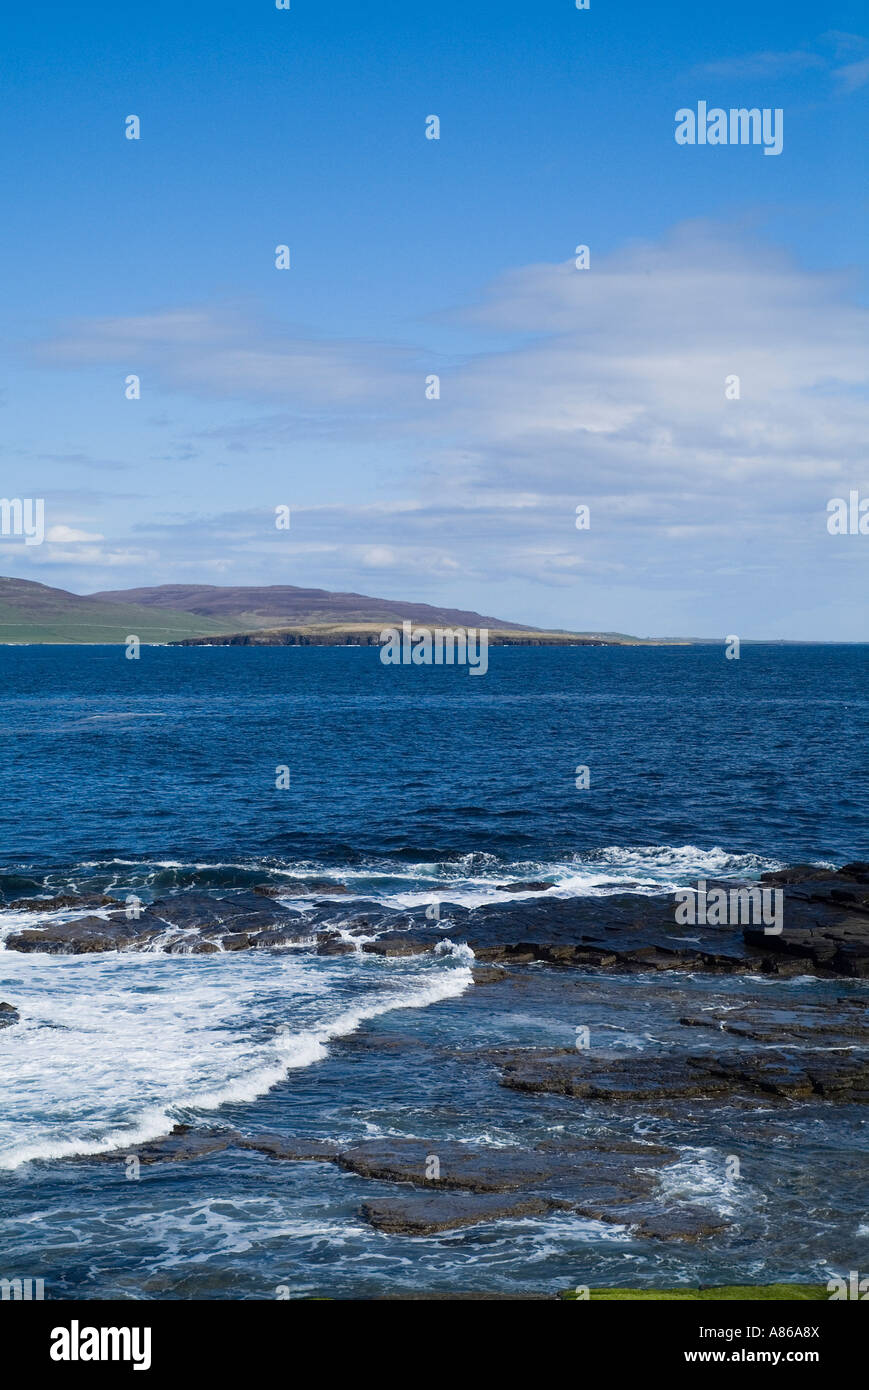 dh Eynhallow Sound EVIE ORKNEY Waves ashore seacliff shelf blue sea and Rousay island coast rugged water Stock Photo